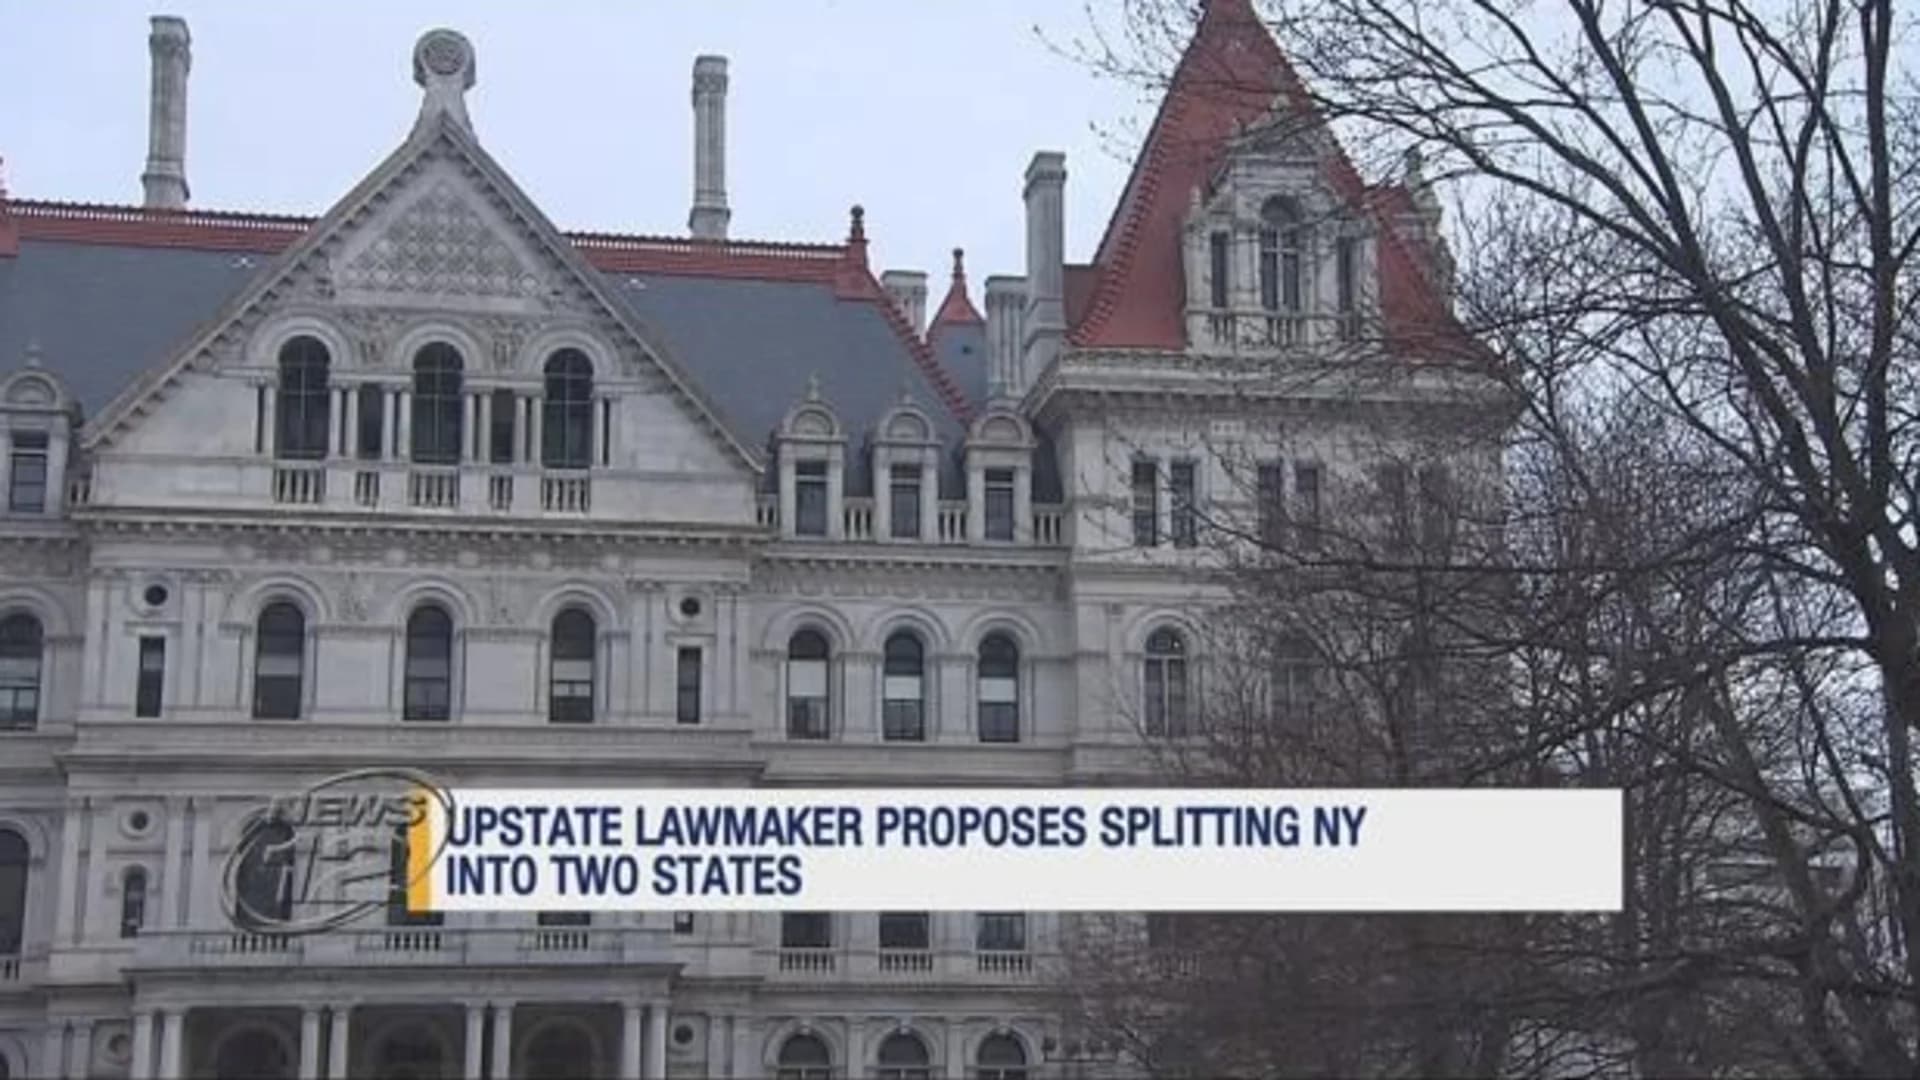 Lawmaker proposes study on splitting NY into 2 states